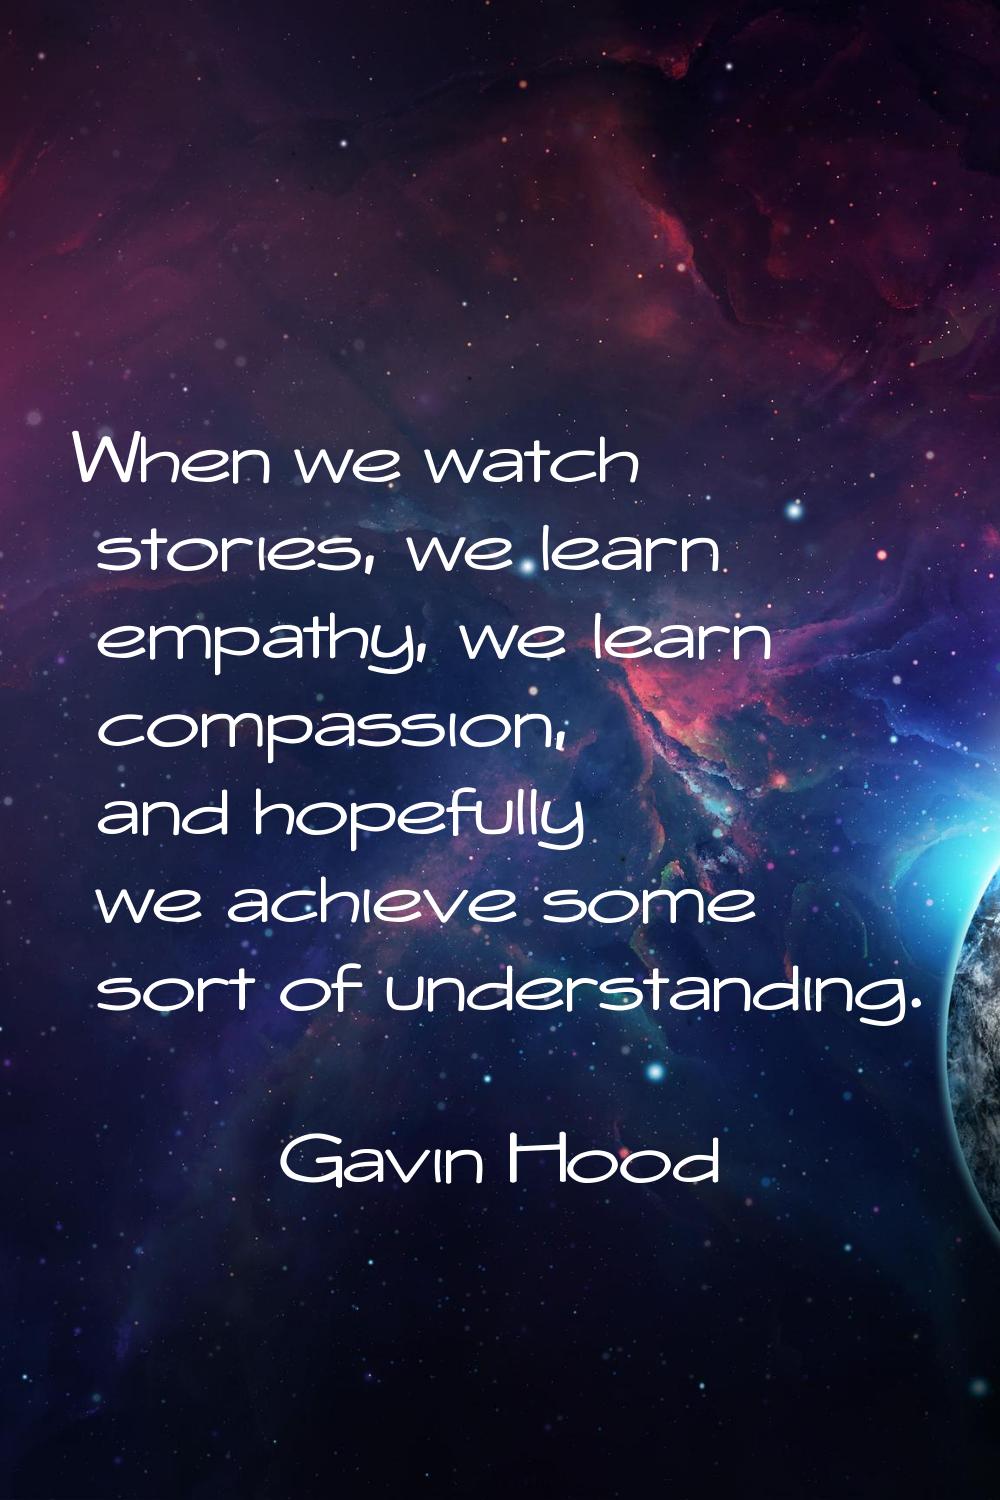 When we watch stories, we learn empathy, we learn compassion, and hopefully we achieve some sort of